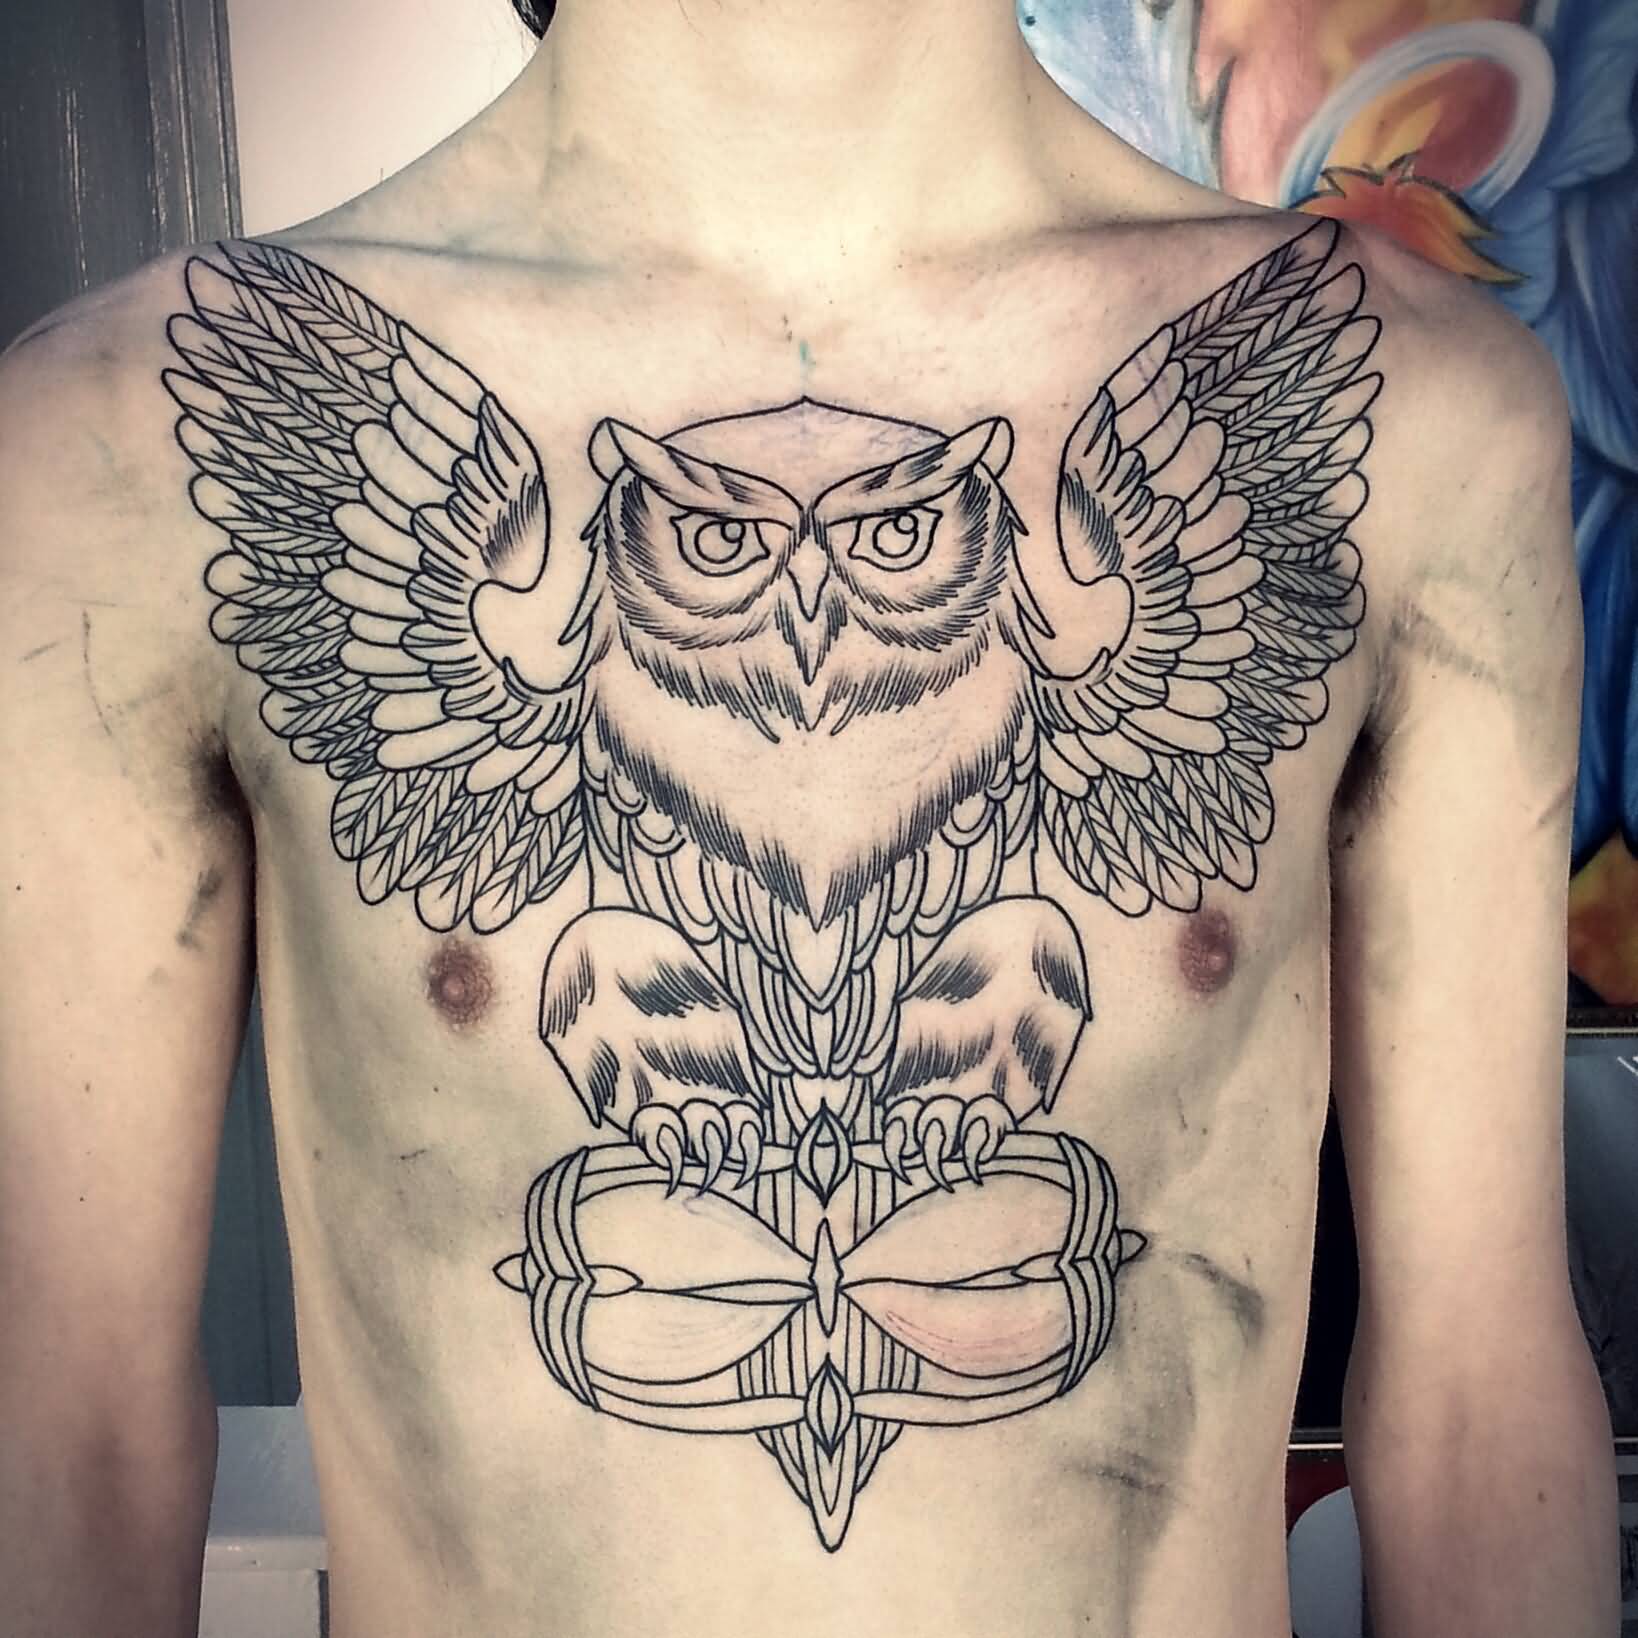 Classic Black Ink Flying Owl With Hourglass Tattoo On Man Chest